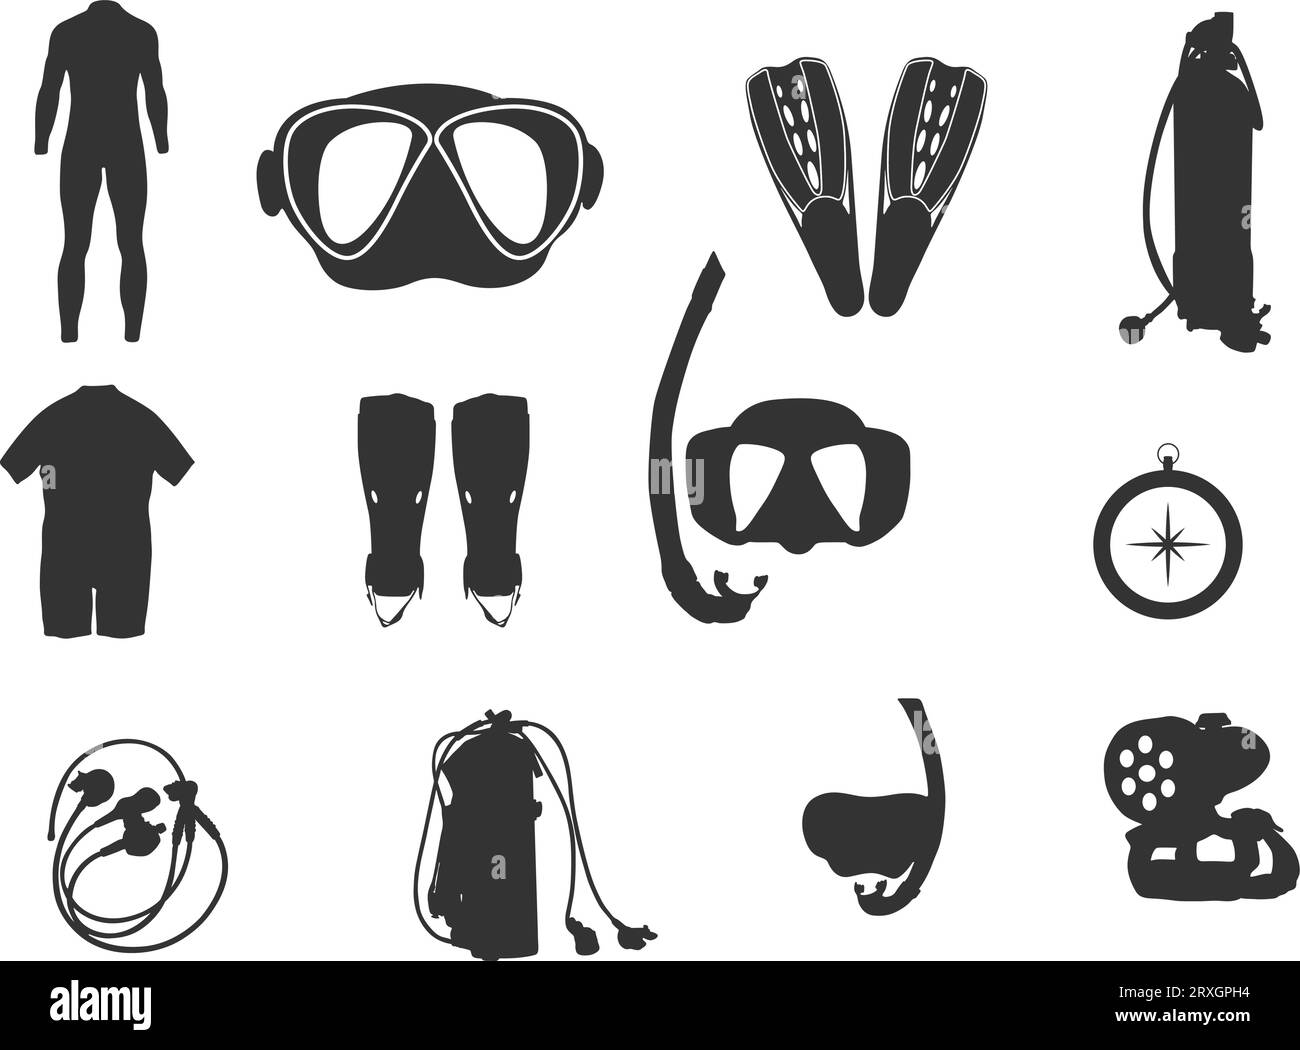 Diving equipment silhouette, Scuba diving equipment silhouette, Equipment silhouette, Diving element vector, Snorkeling gear icons. Stock Vector